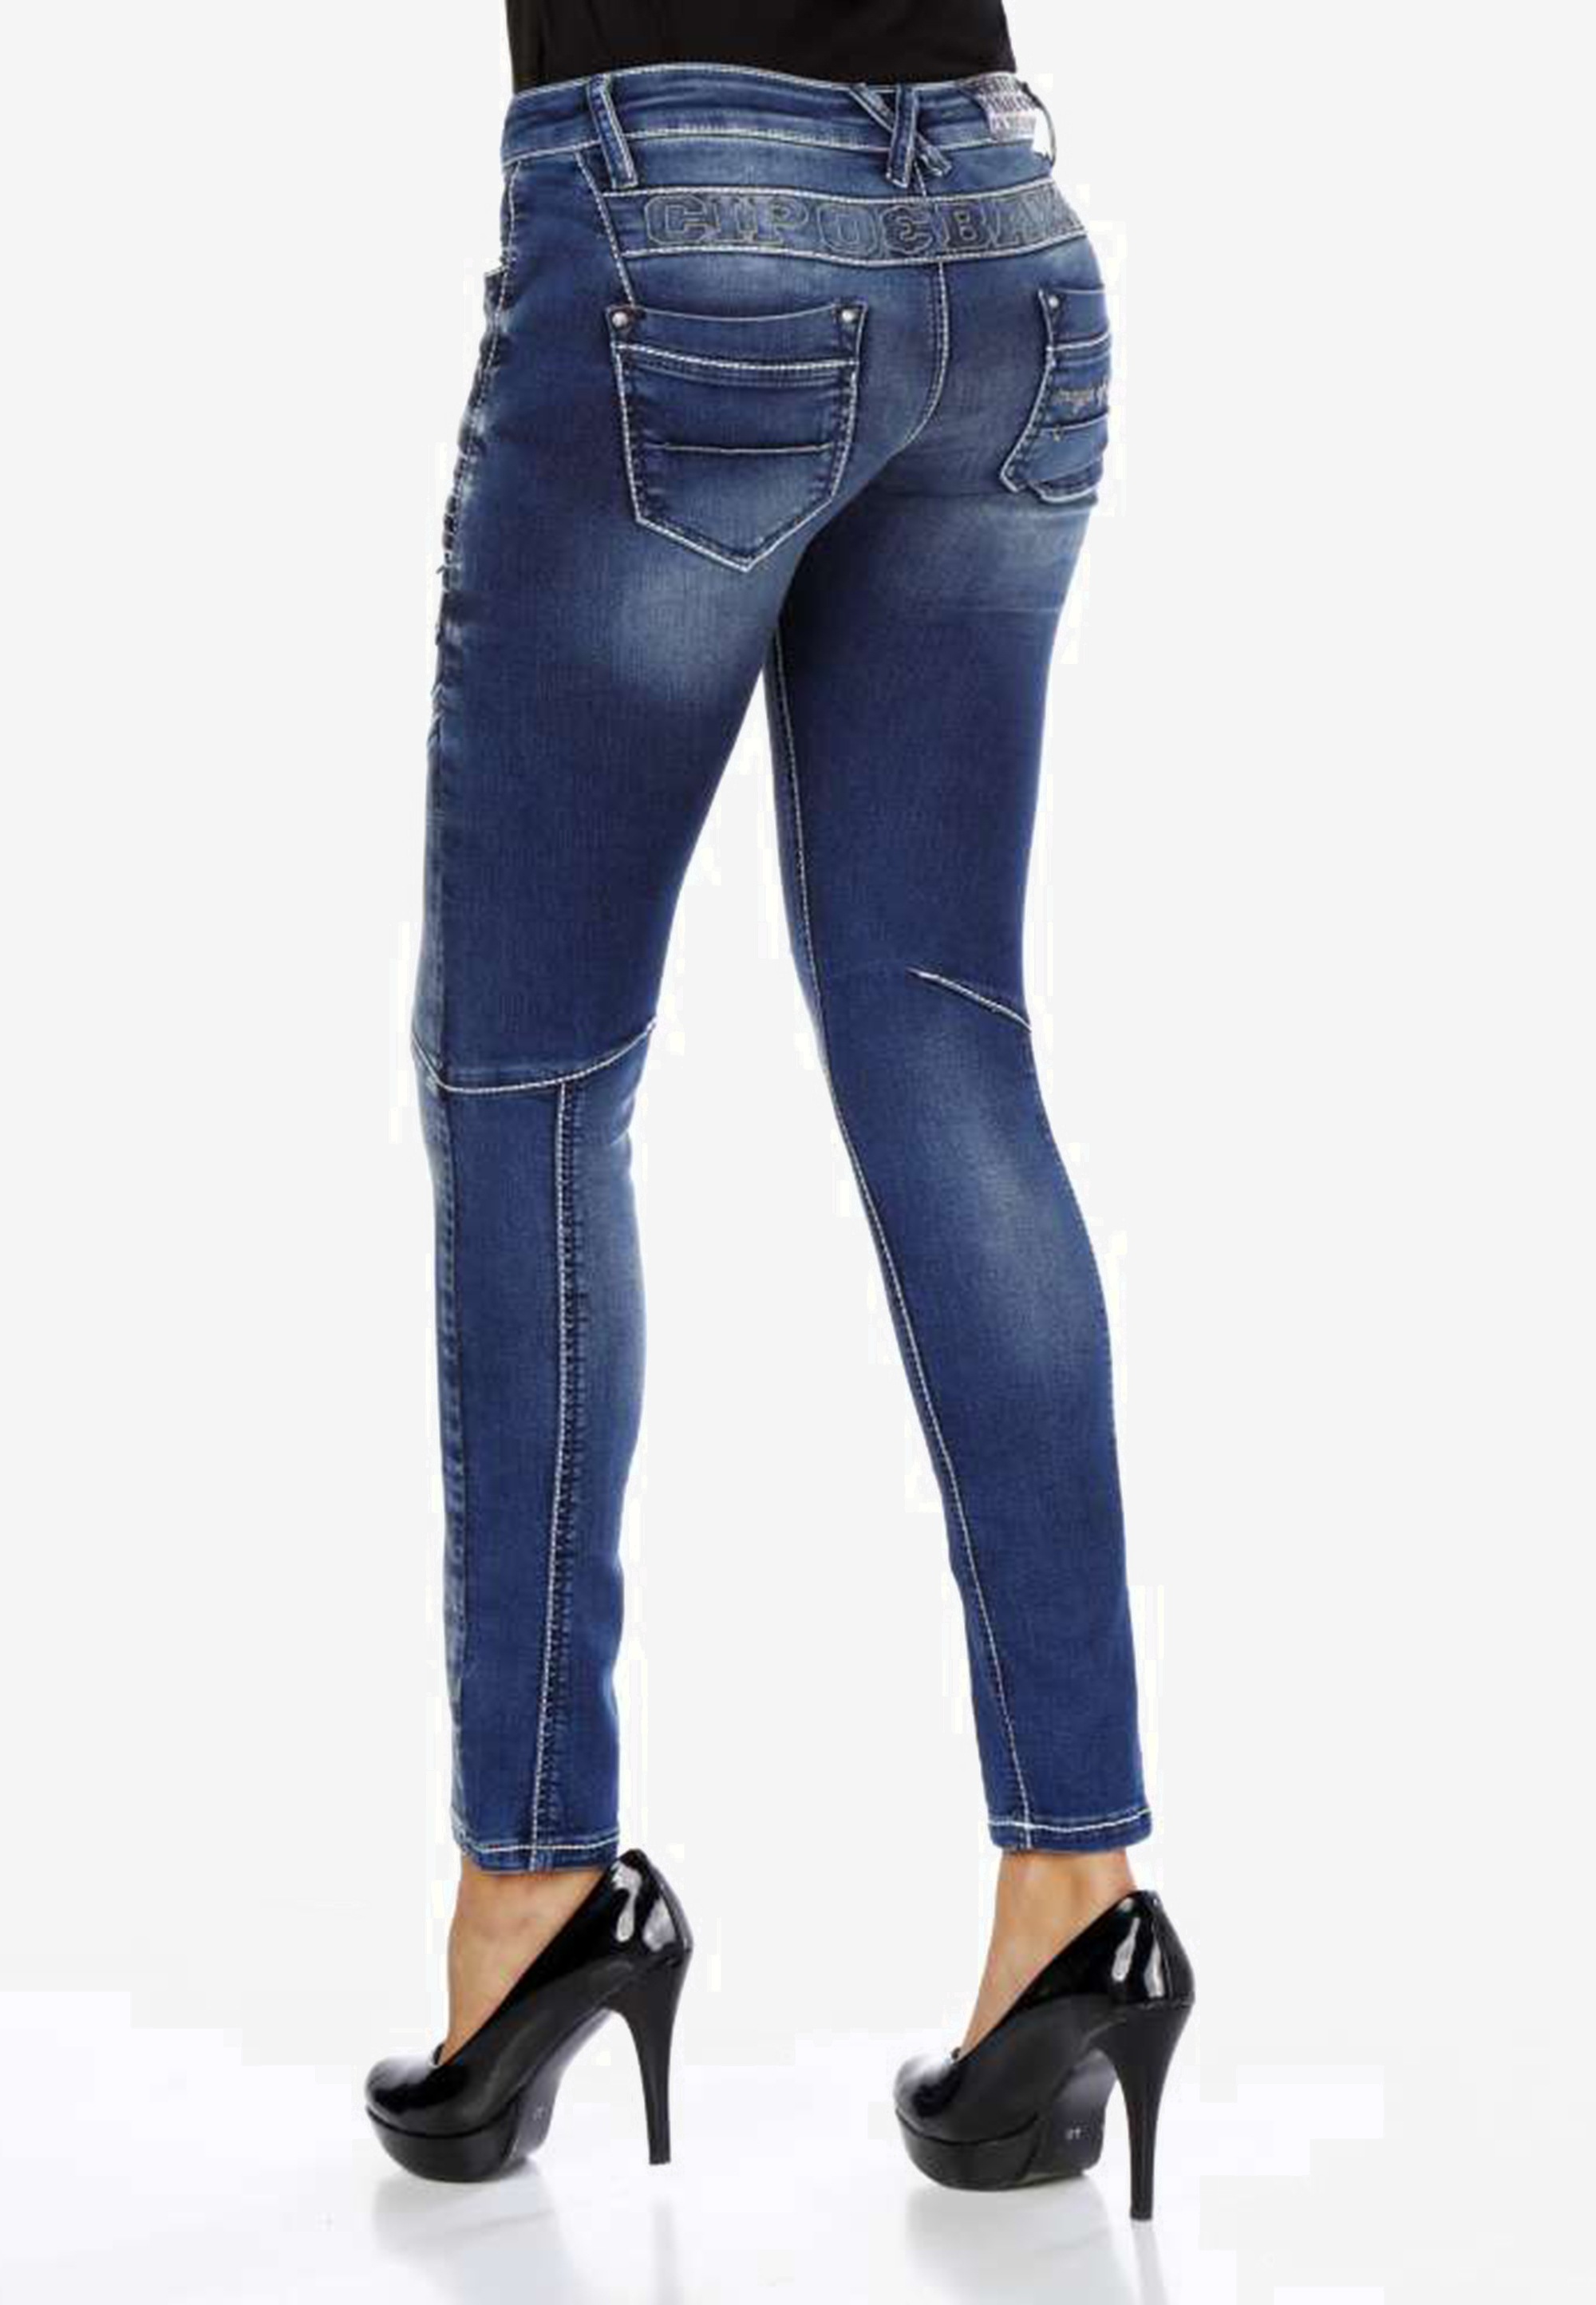 Cipo & Baxx Bequeme Jeans, mit niedriger Taille in Skinny Fİt